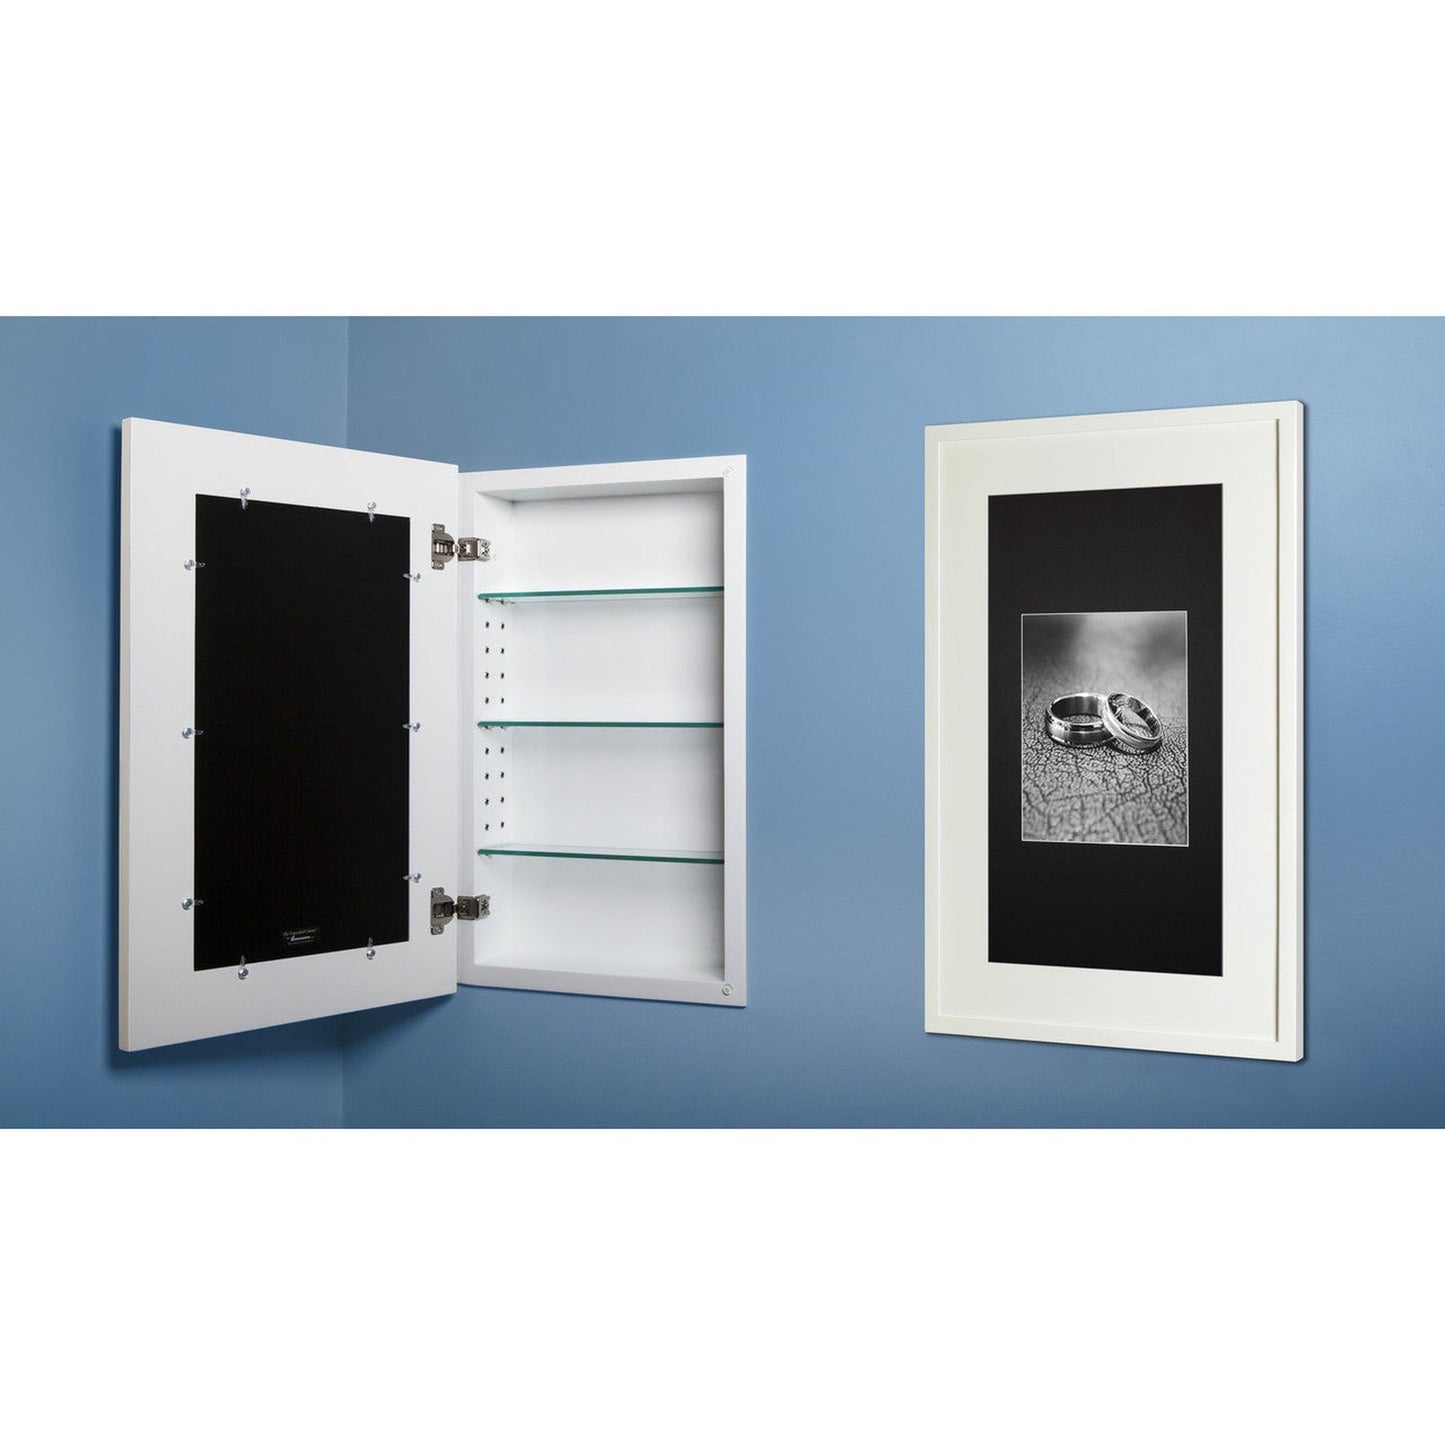 Fox Hollow Furnishings 14" x 24" White Extra Large Contemporary Standard 3.75" Depth White Interior Recessed Picture Frame Medicine Cabinet With Mirror and White Matting